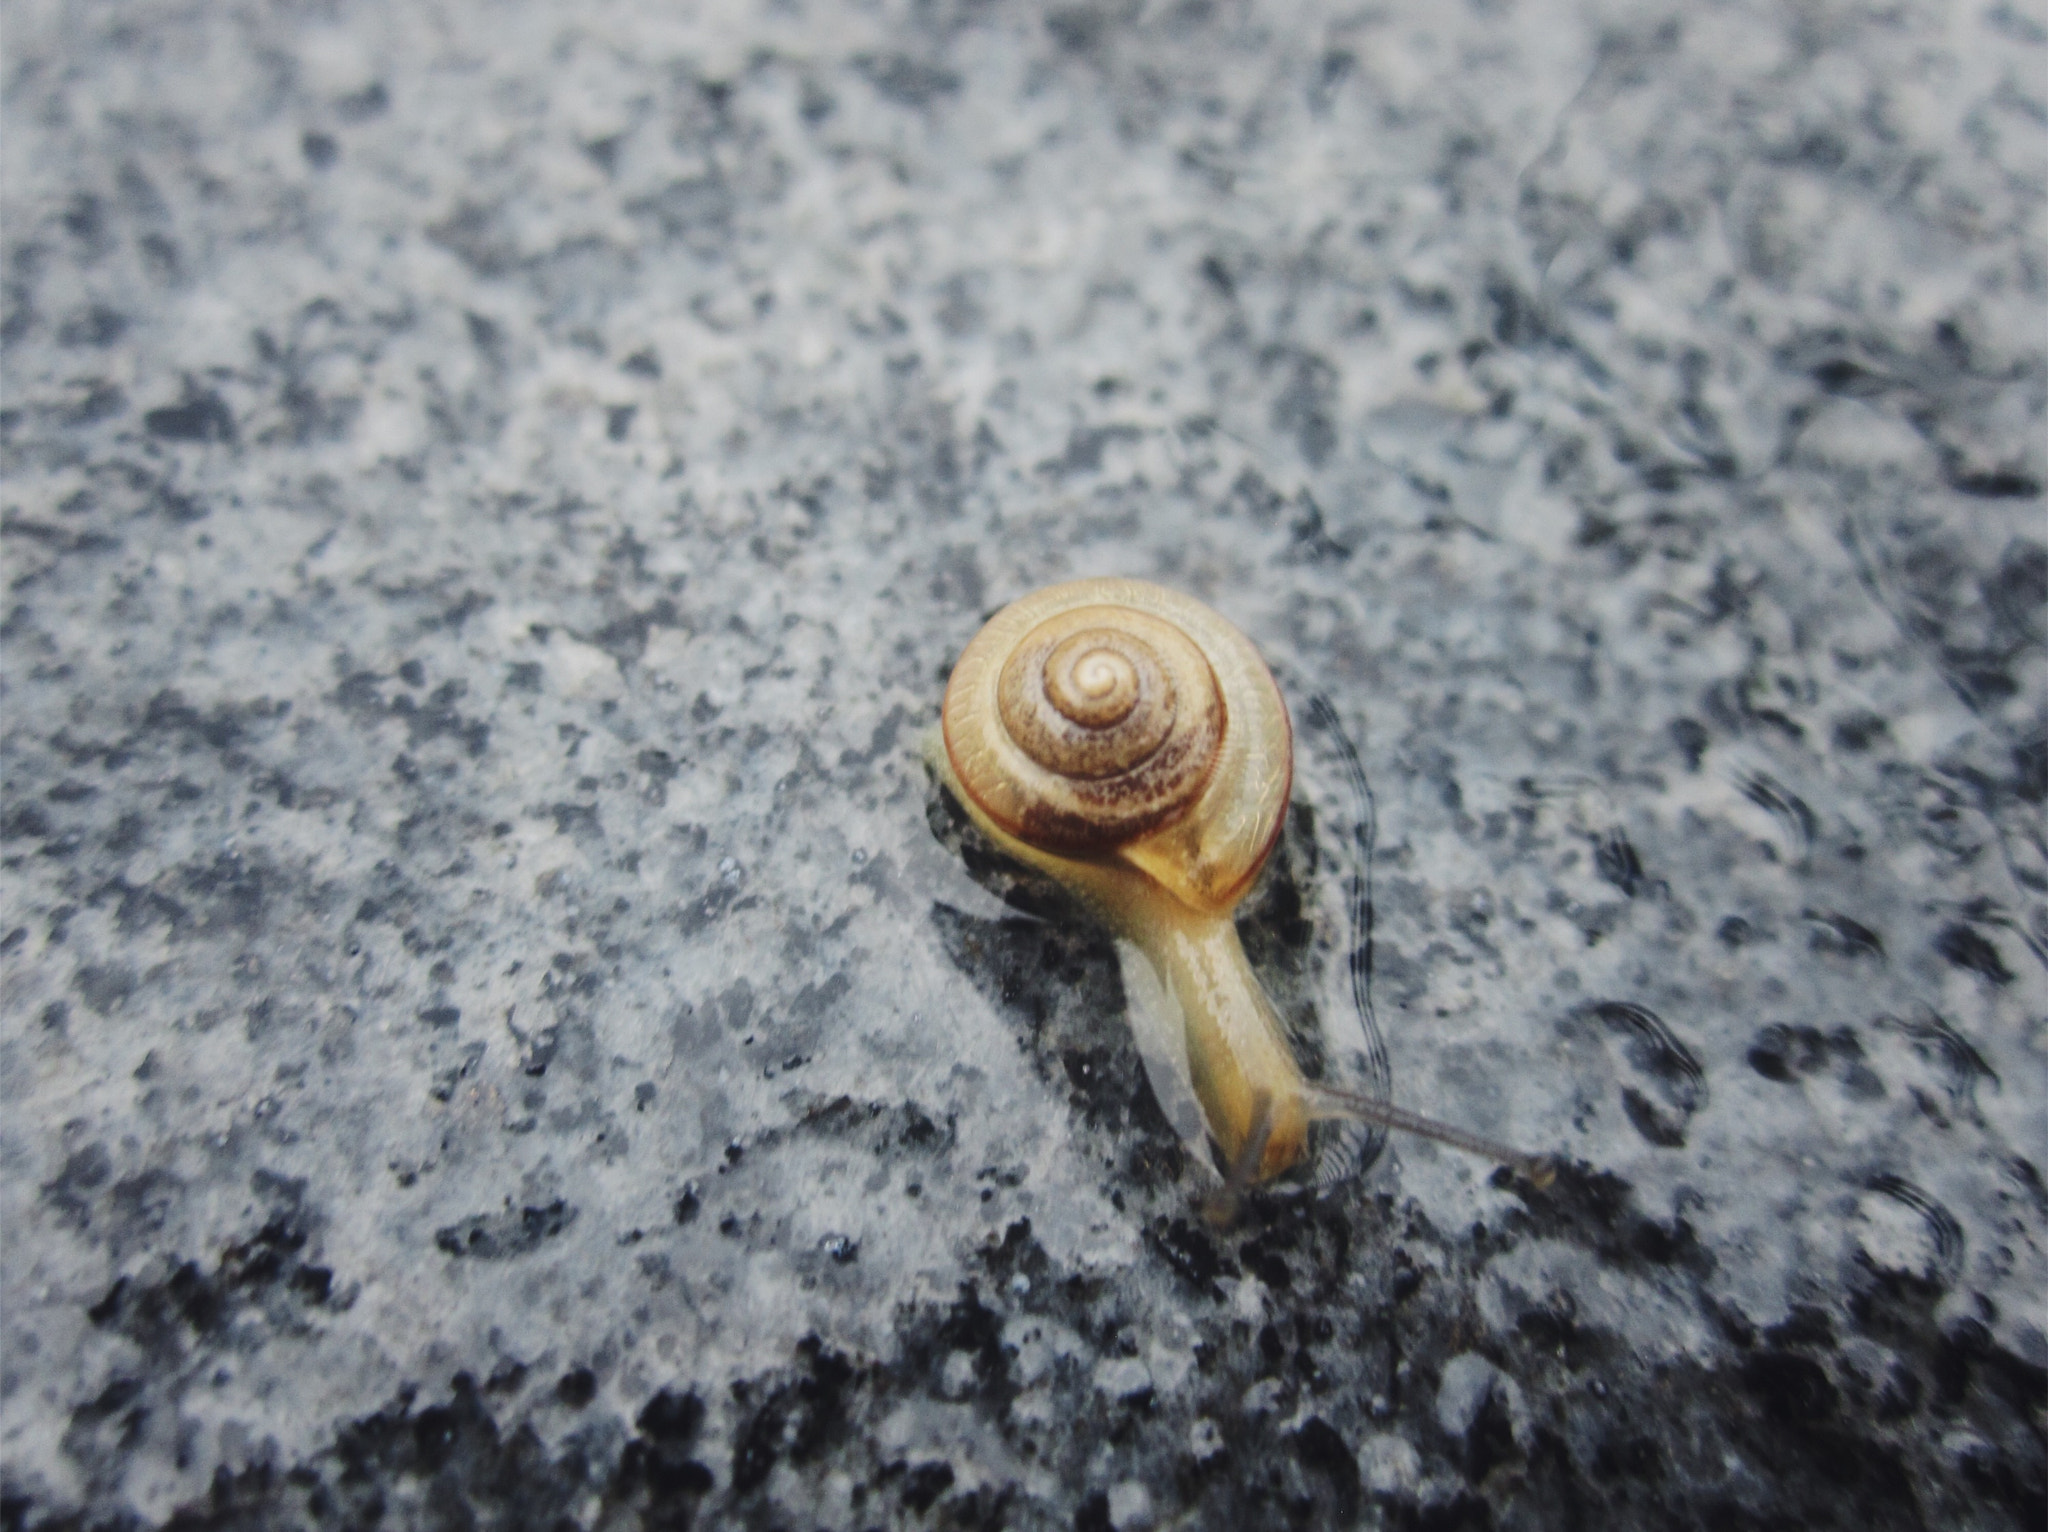 Canon PowerShot SD940 IS (Digital IXUS 120 IS / IXY Digital 220 IS) sample photo. Snail in water photography